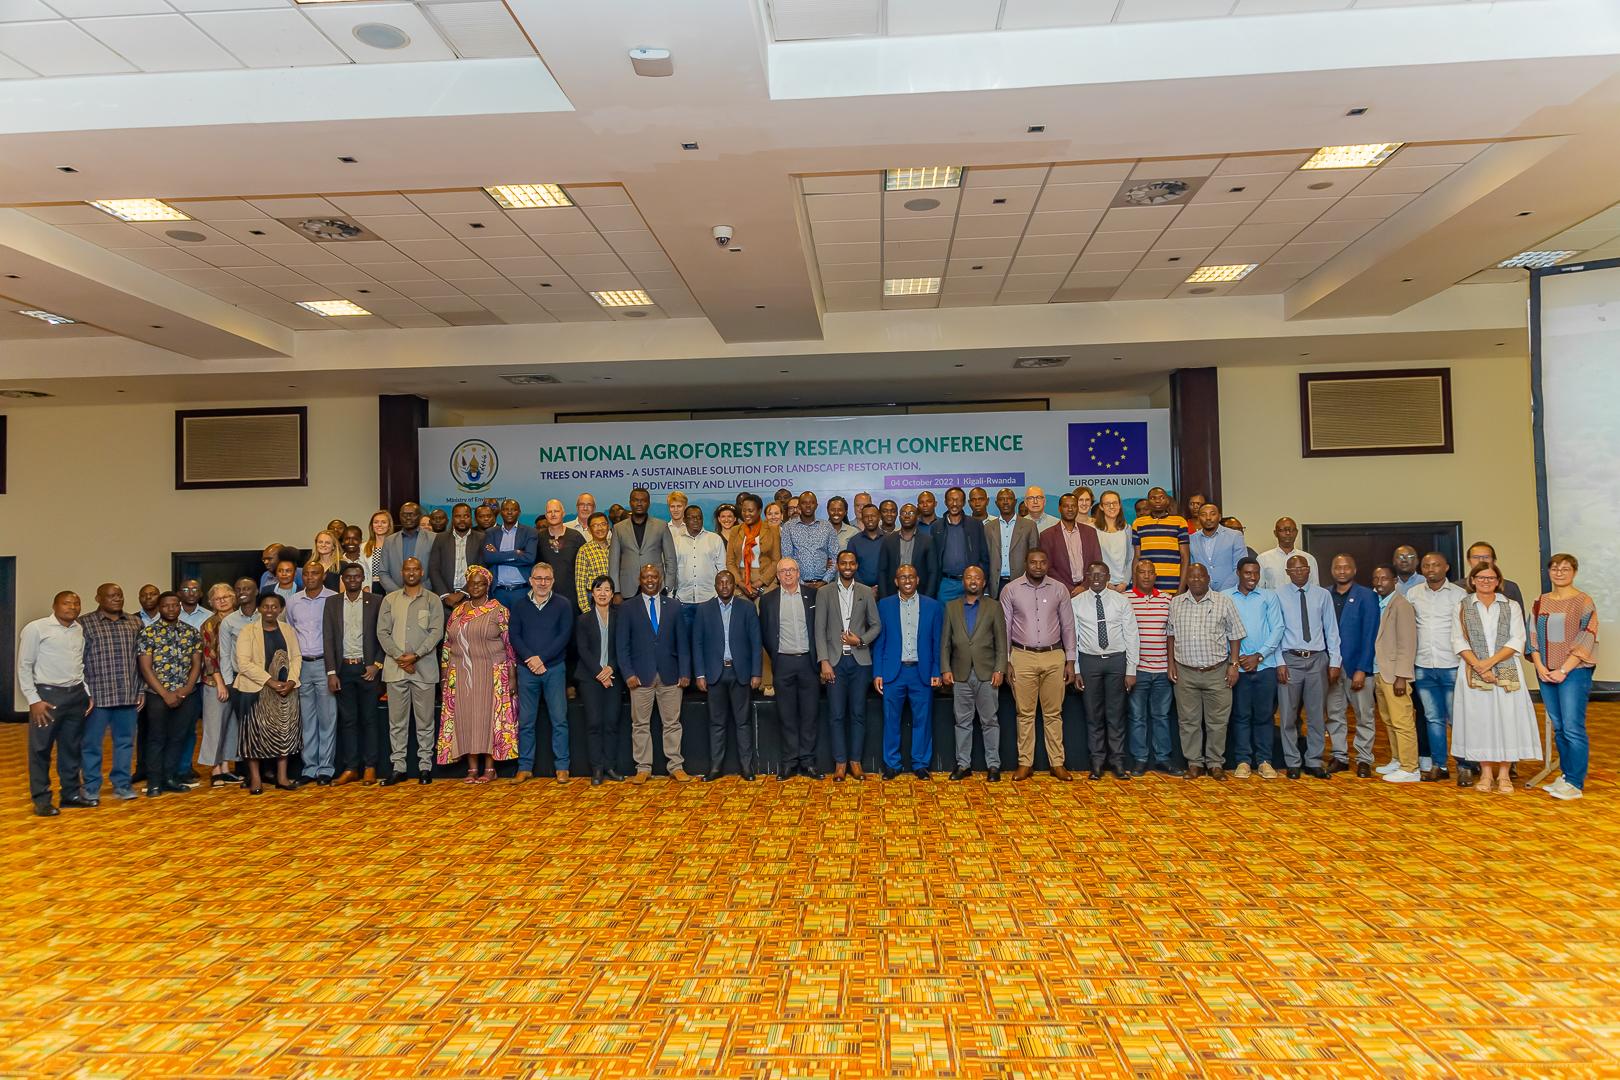 Rwanda: National Agroforestry Research Conference - Trees on Farms for Landscape Restoration, Biodiversity and Livelihoods